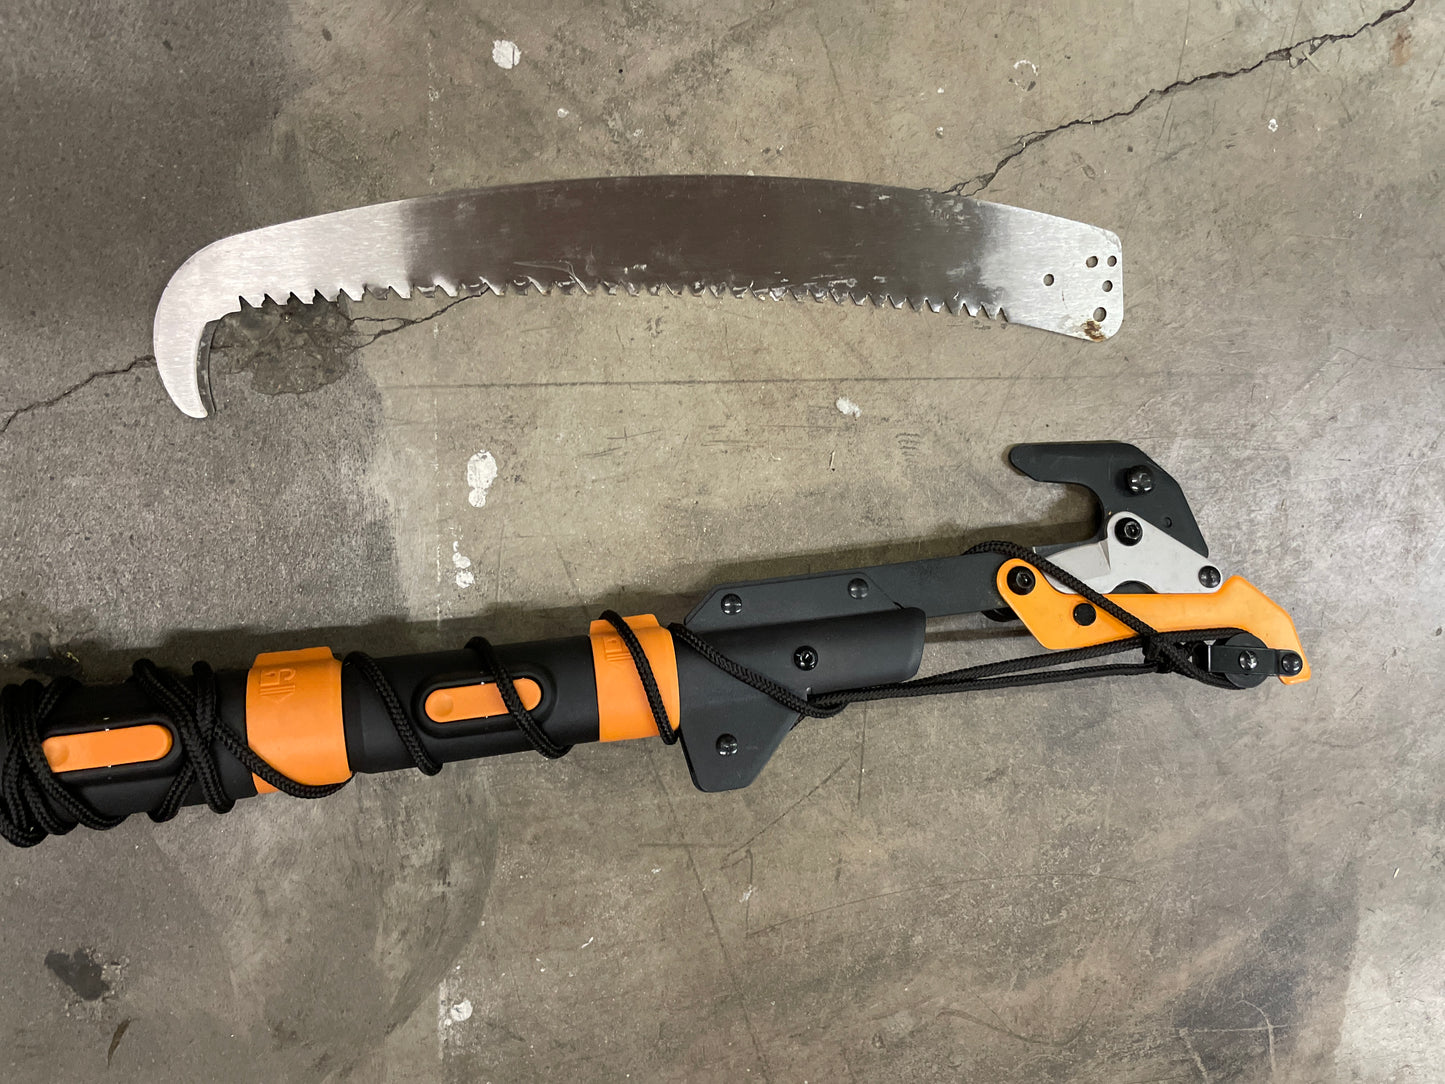 Costco - Power-lever Extendable Pole Saw & Pruner, 7' - 16' - Retail $70